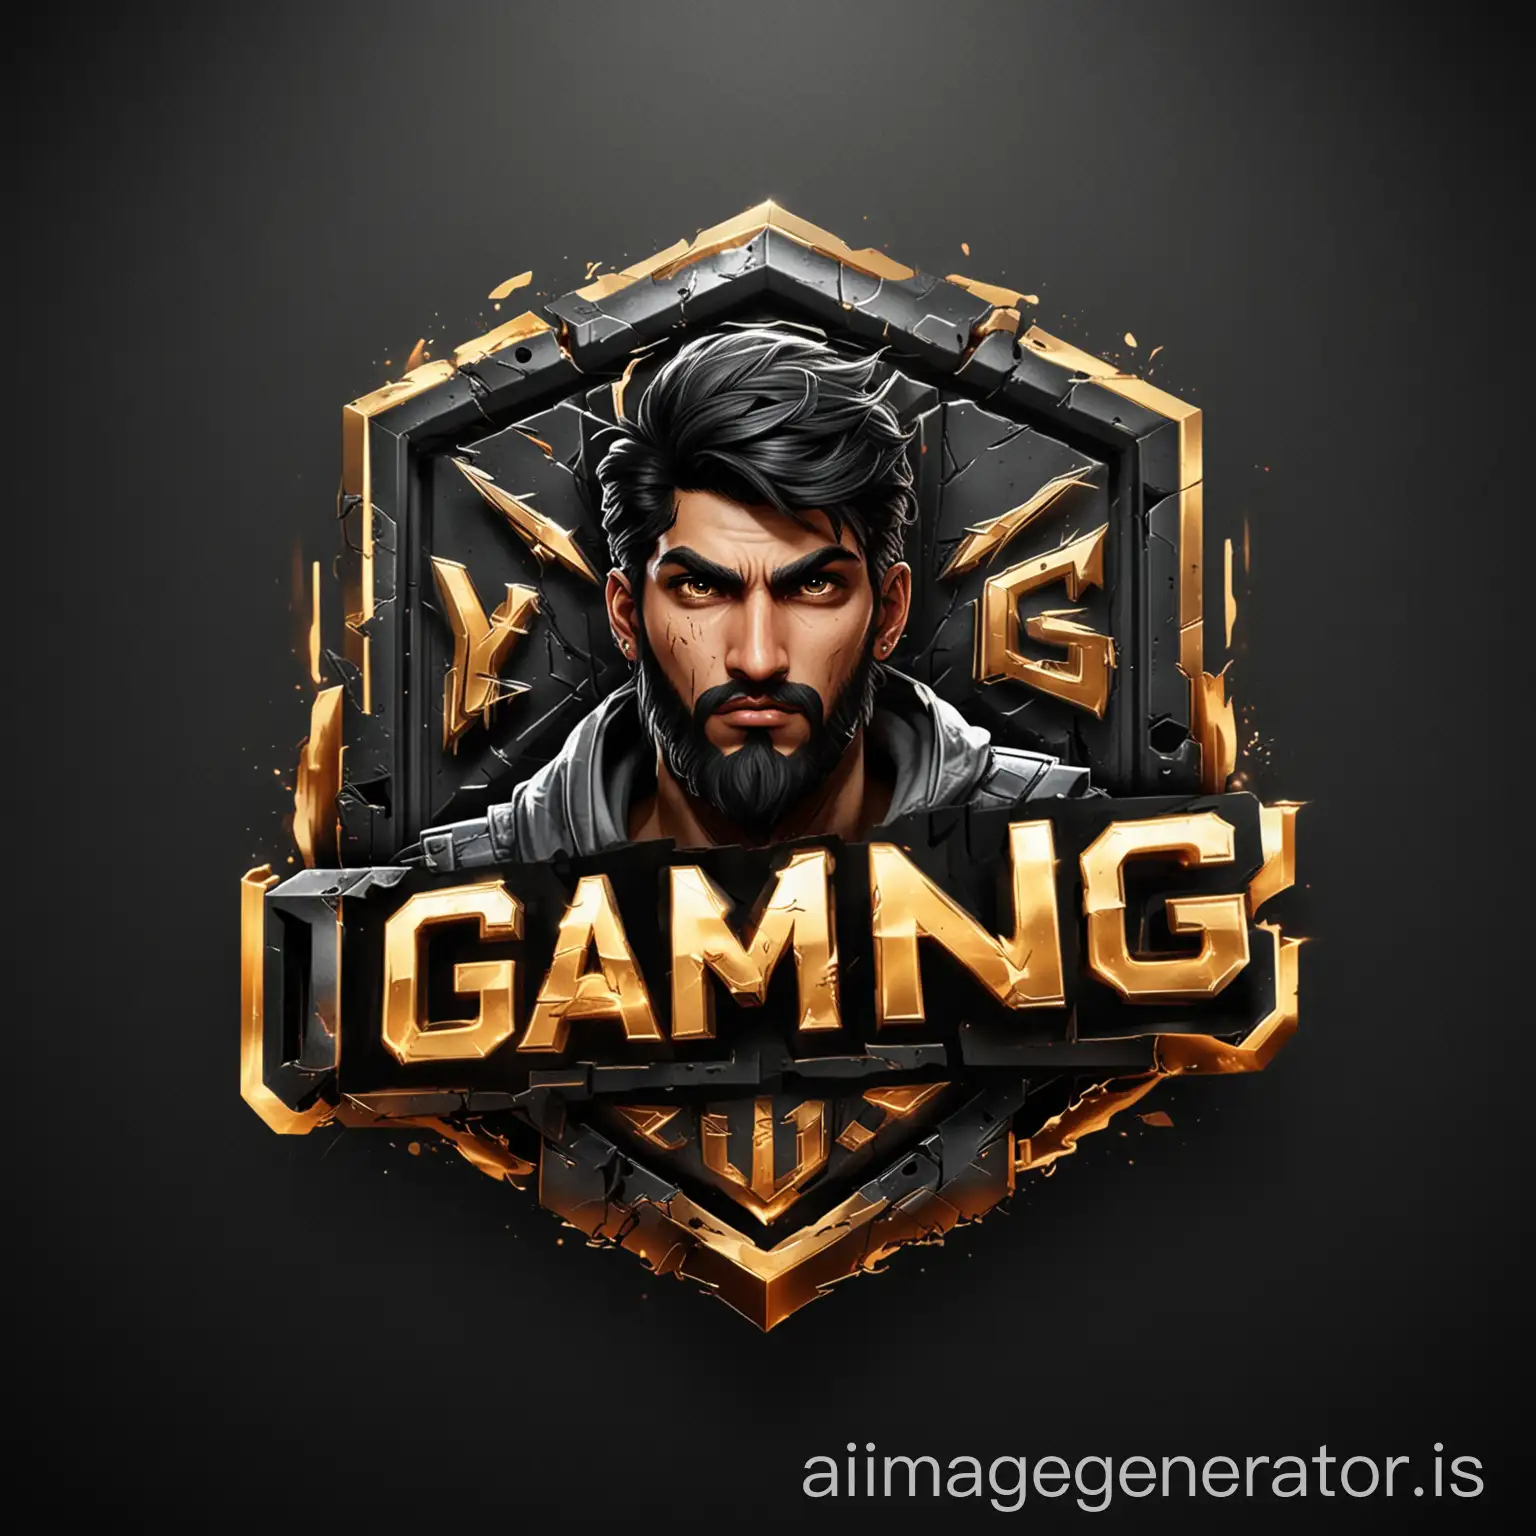 Professional-Gaming-Logo-Design-in-High-Quality-8K-Resolution